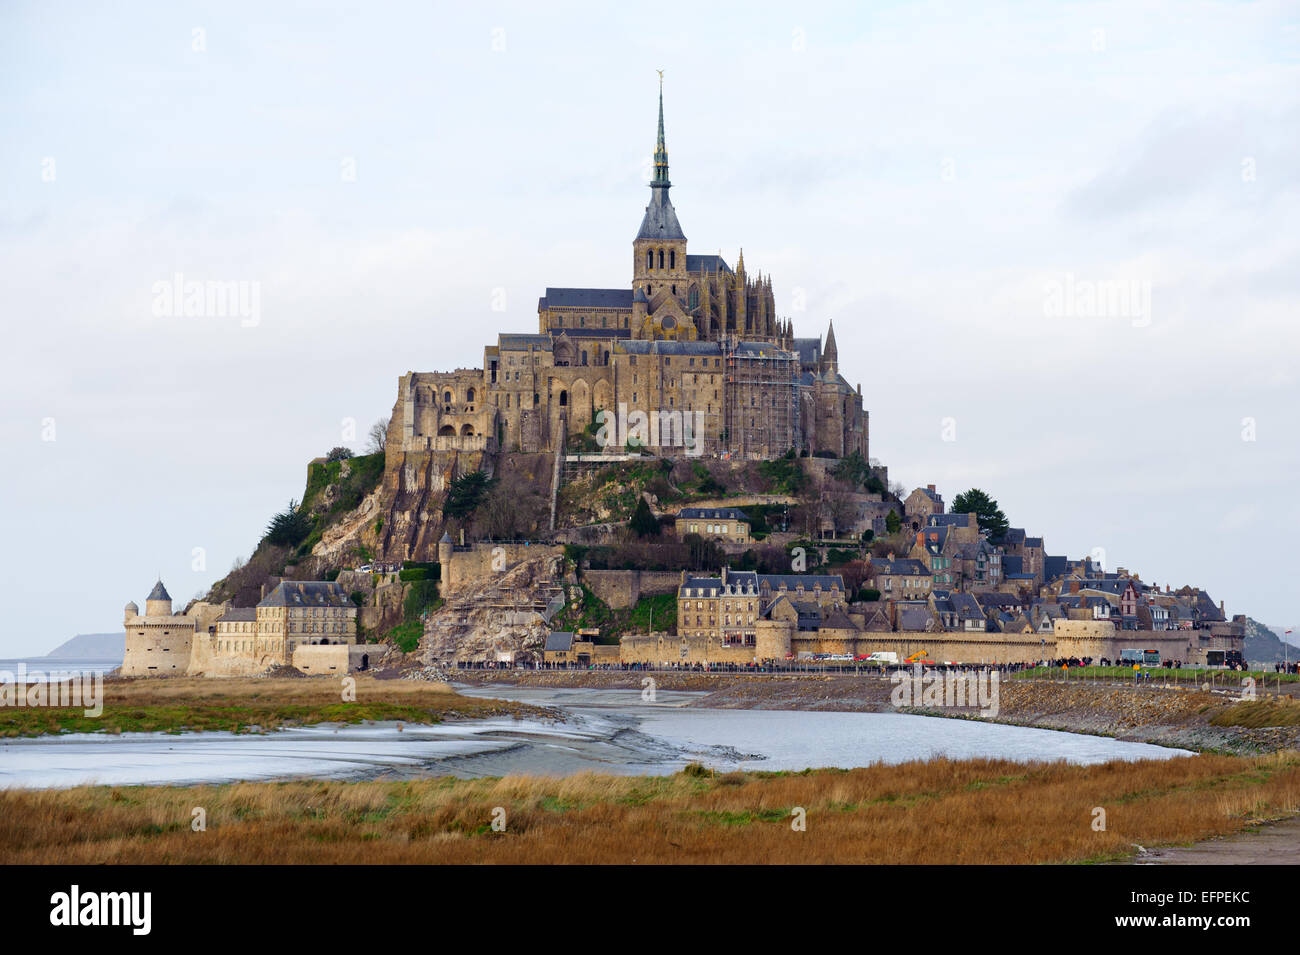 View on the Le Mont Saint Michel monastery, Normandy, France.Photo taken on: January 02nd, 2014 Stock Photo